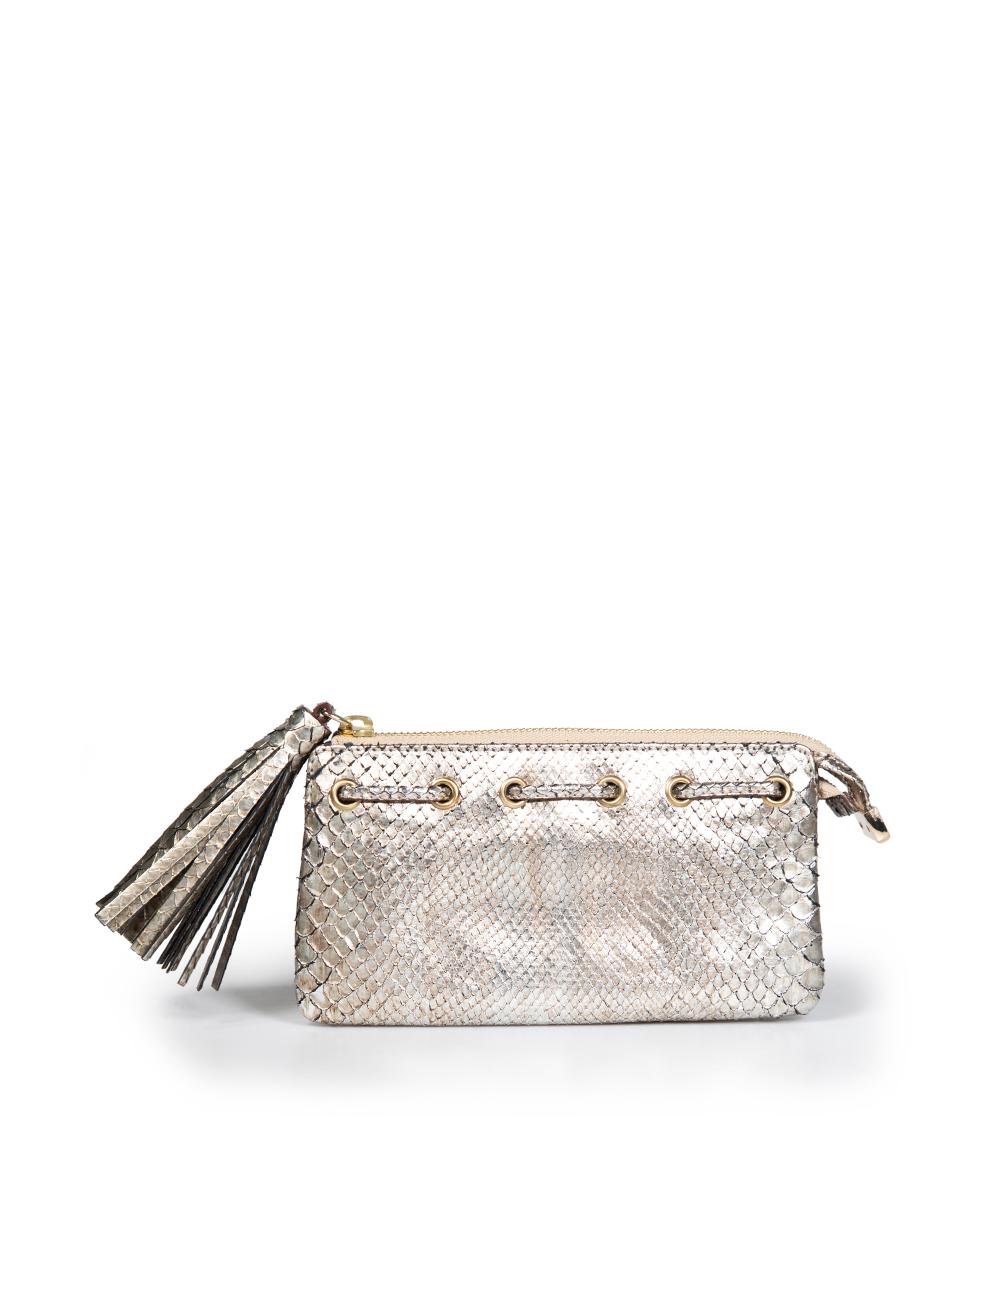 Anya Hindmarch Silver Metallic Tassel Python Leather Wallet In Excellent Condition For Sale In London, GB